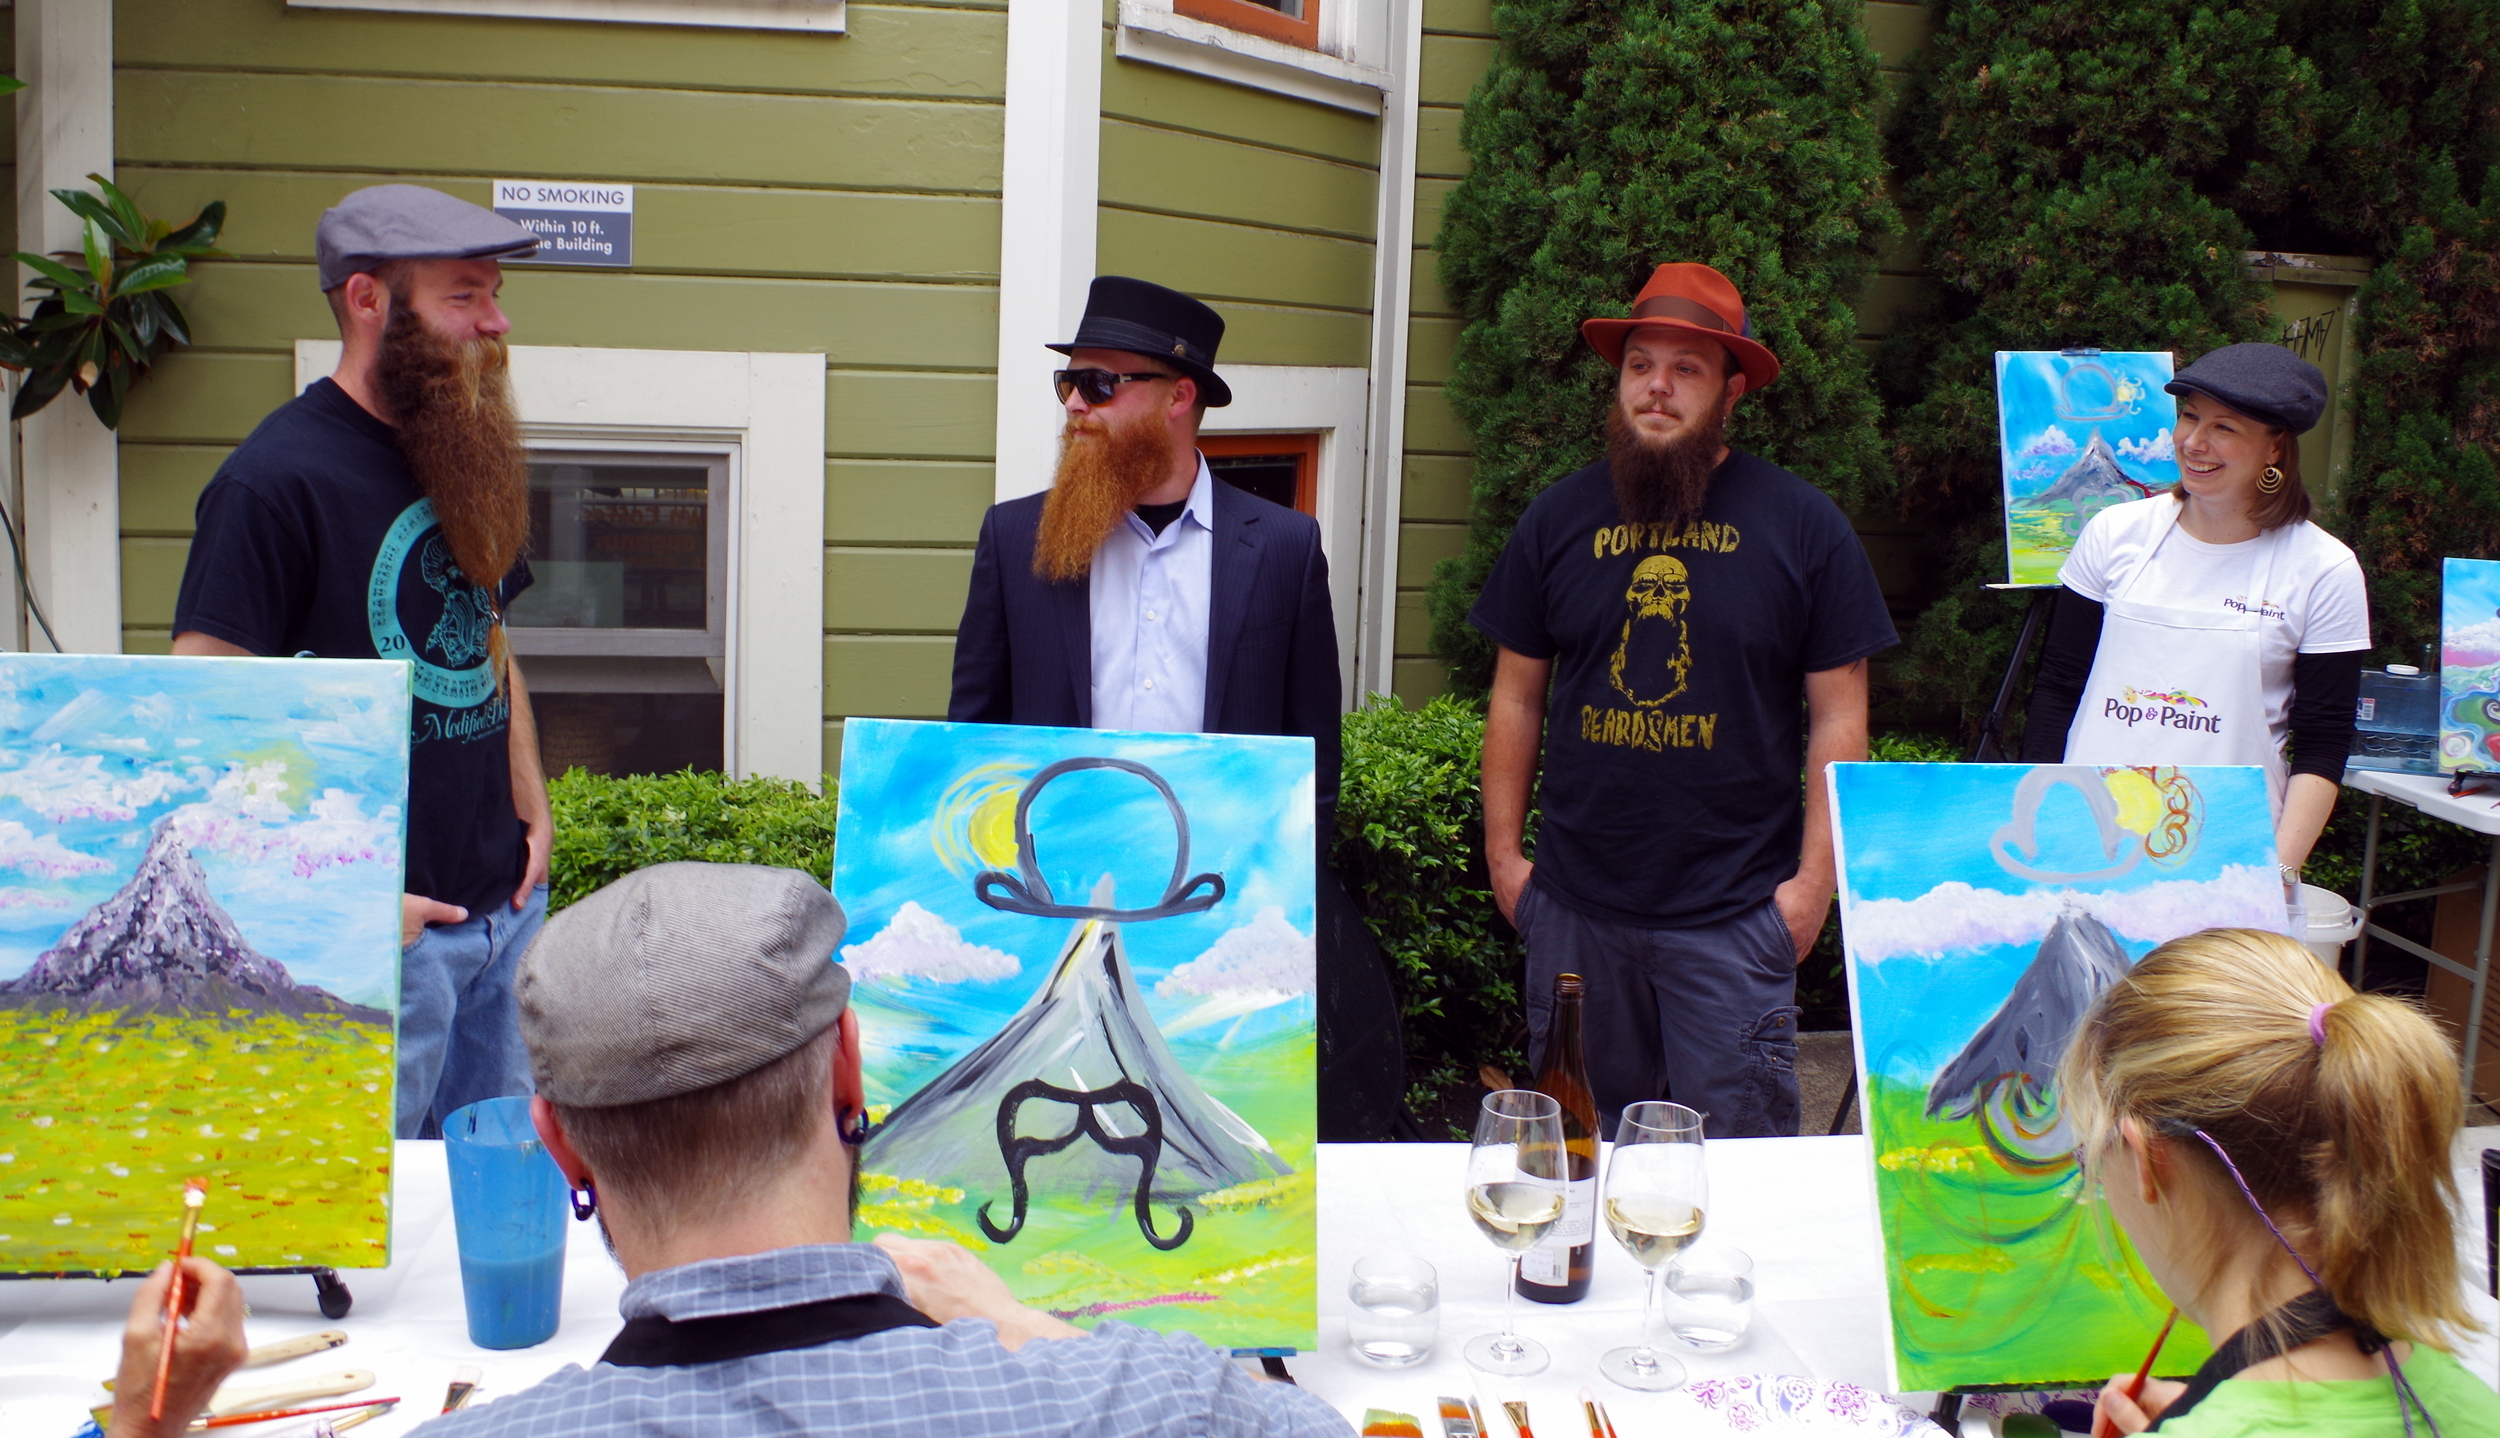 Angie, owner of Pop & Paint, chatting with the Portland Beardsmen!